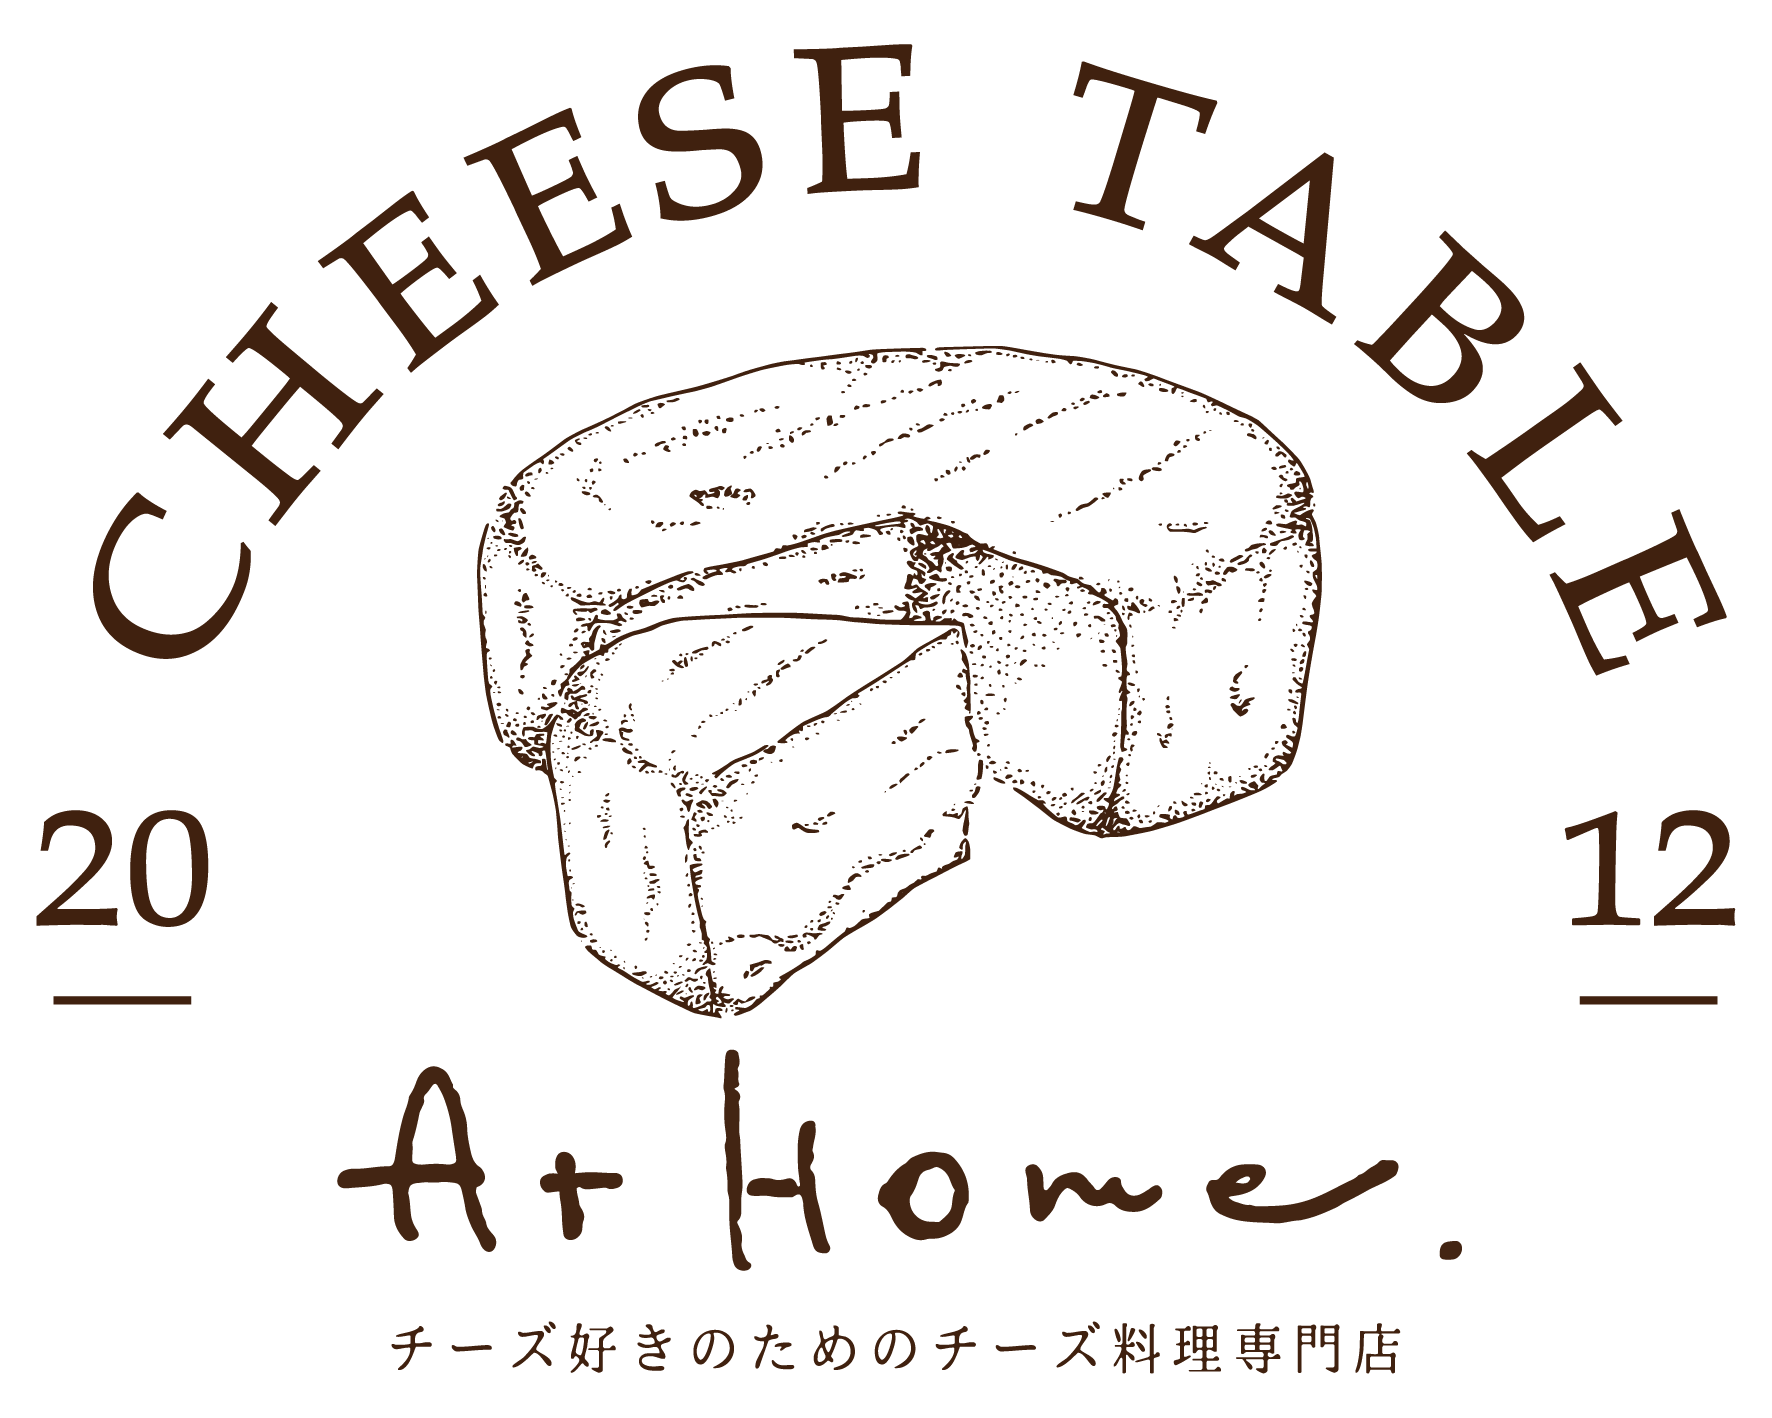 CheeseTable at Home